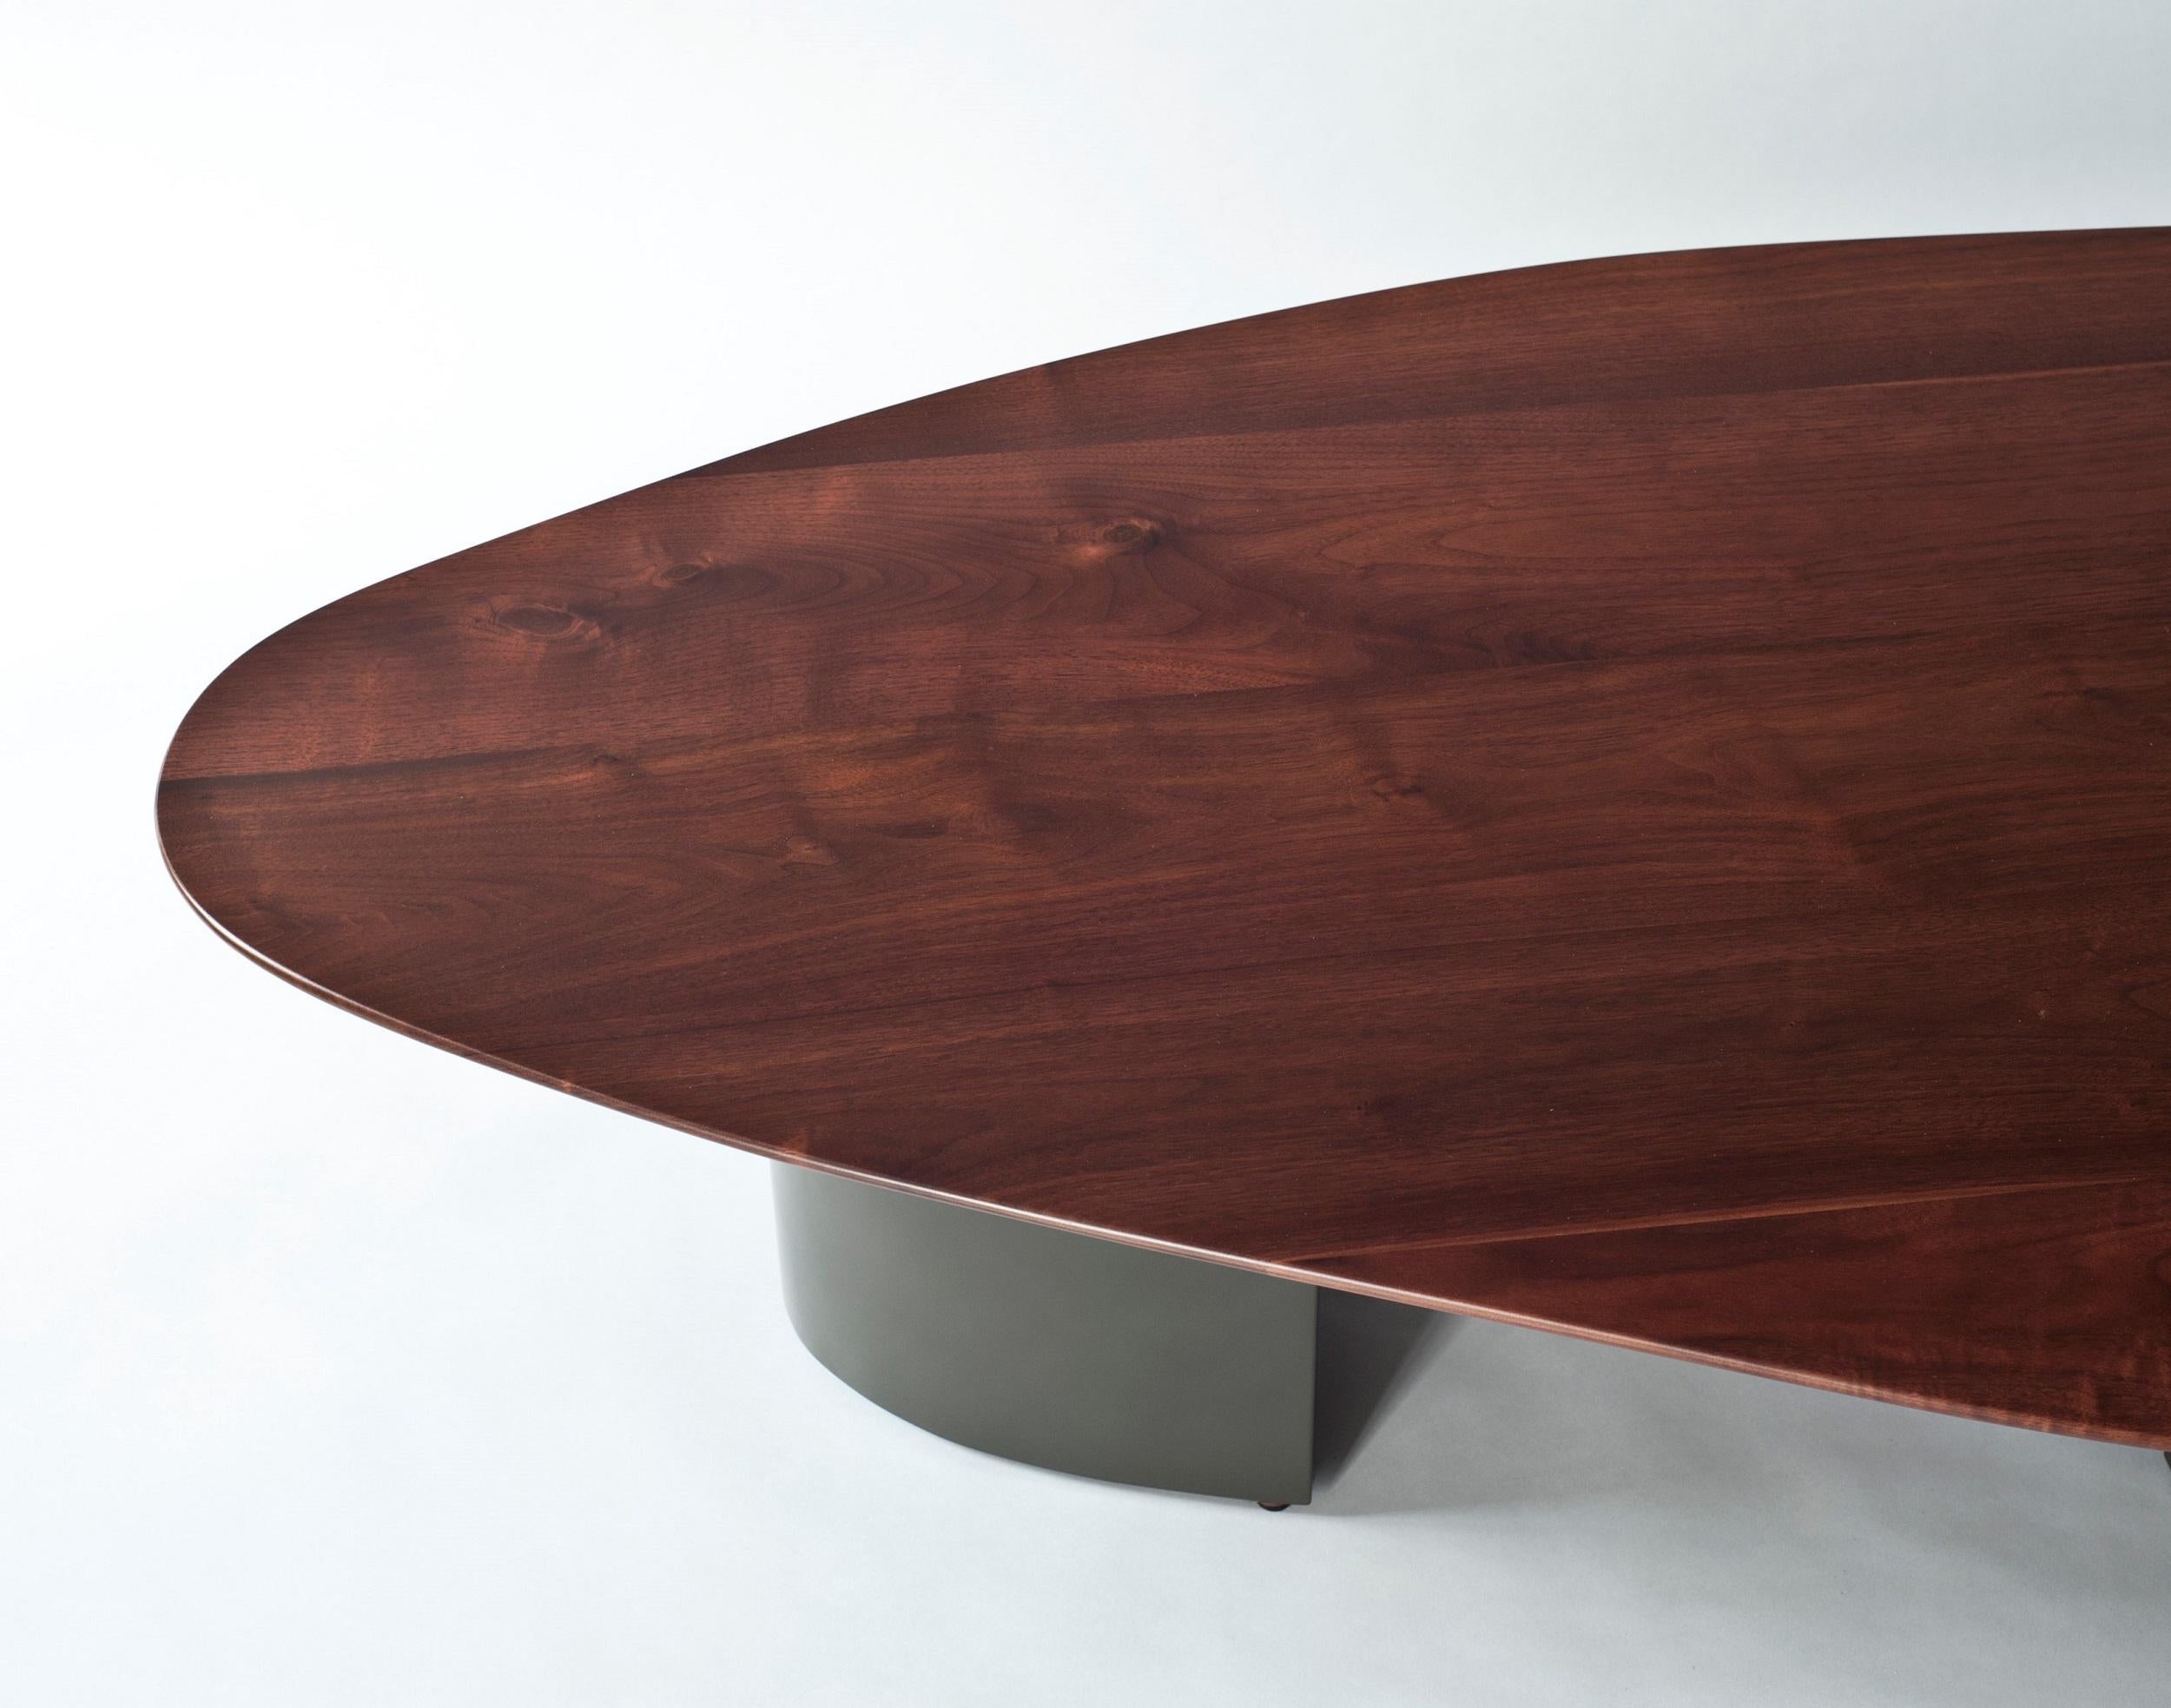 Sculptural solid walnut top with base in olive grey lacquer.